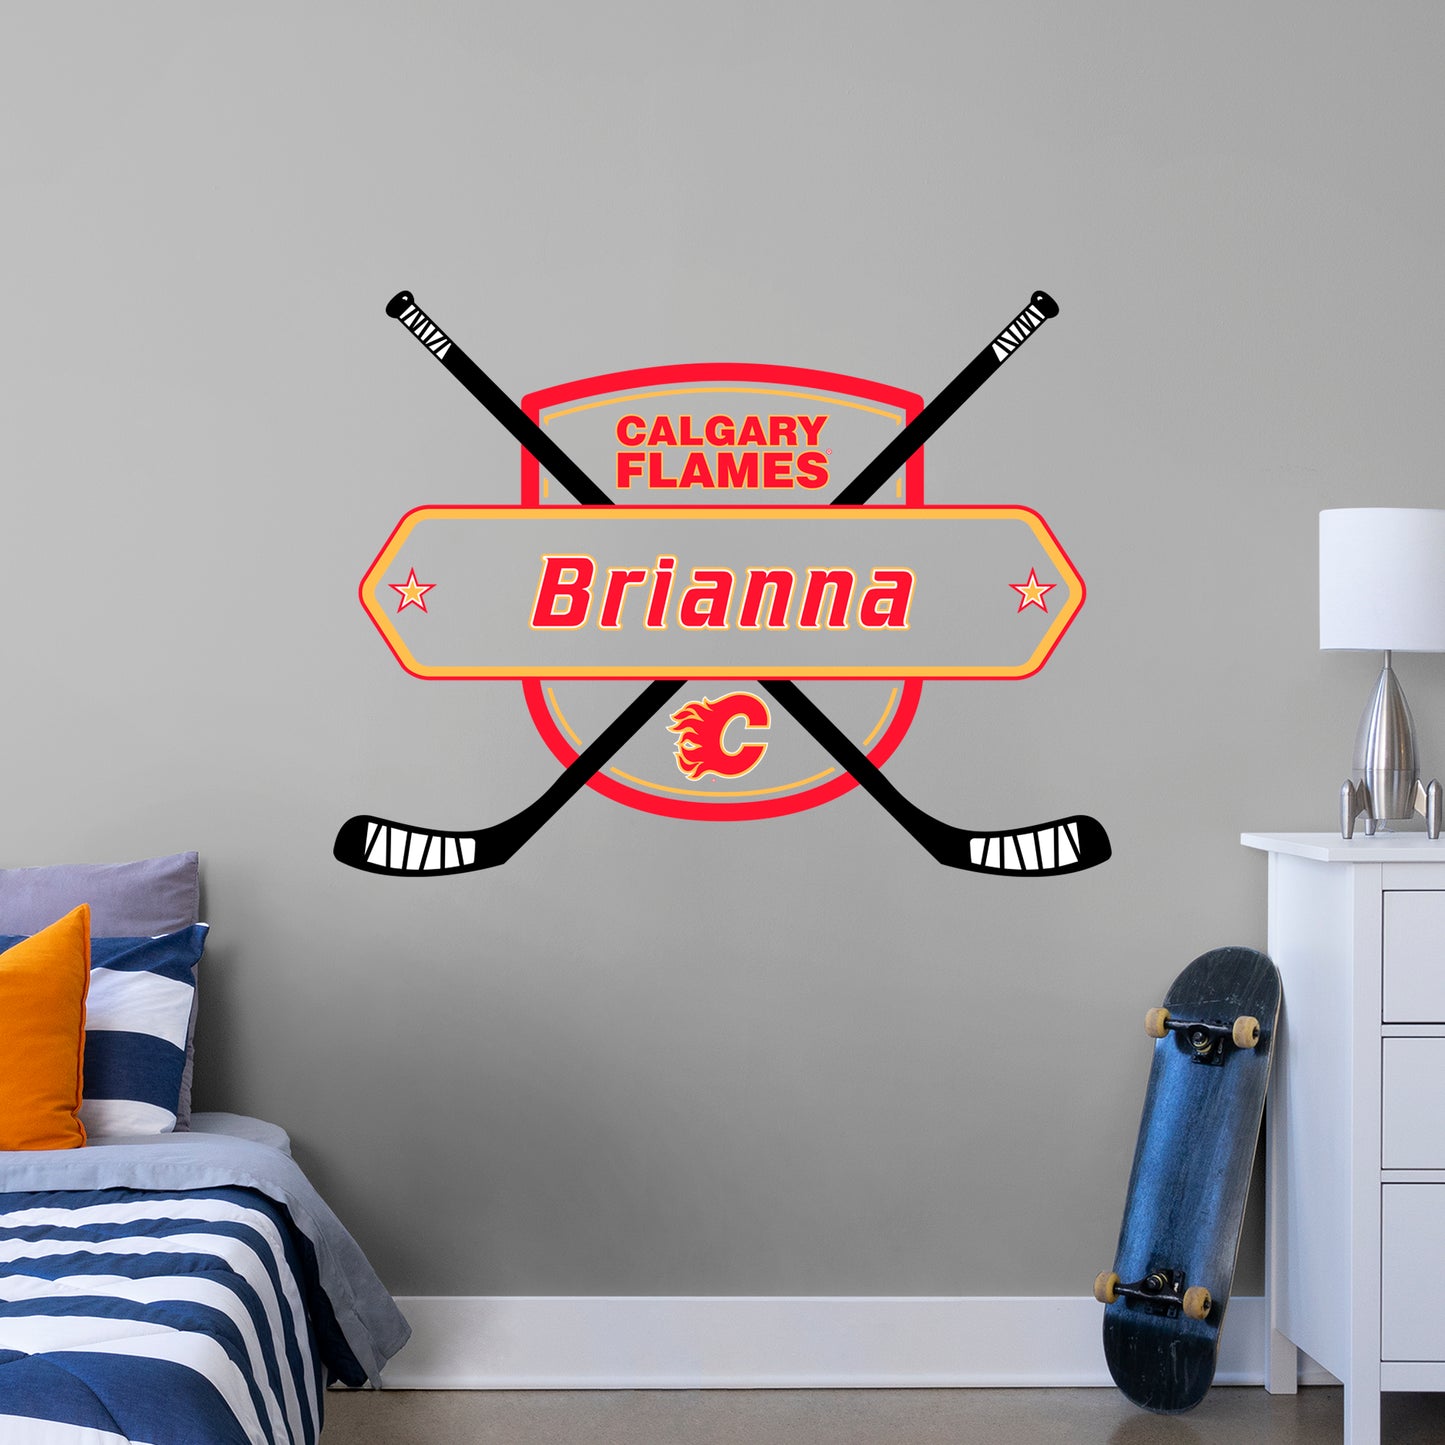 Calgary Flames 2020 Sticks Personalized Name PREMASK  - Officially Licensed NHL Removable Wall Decal